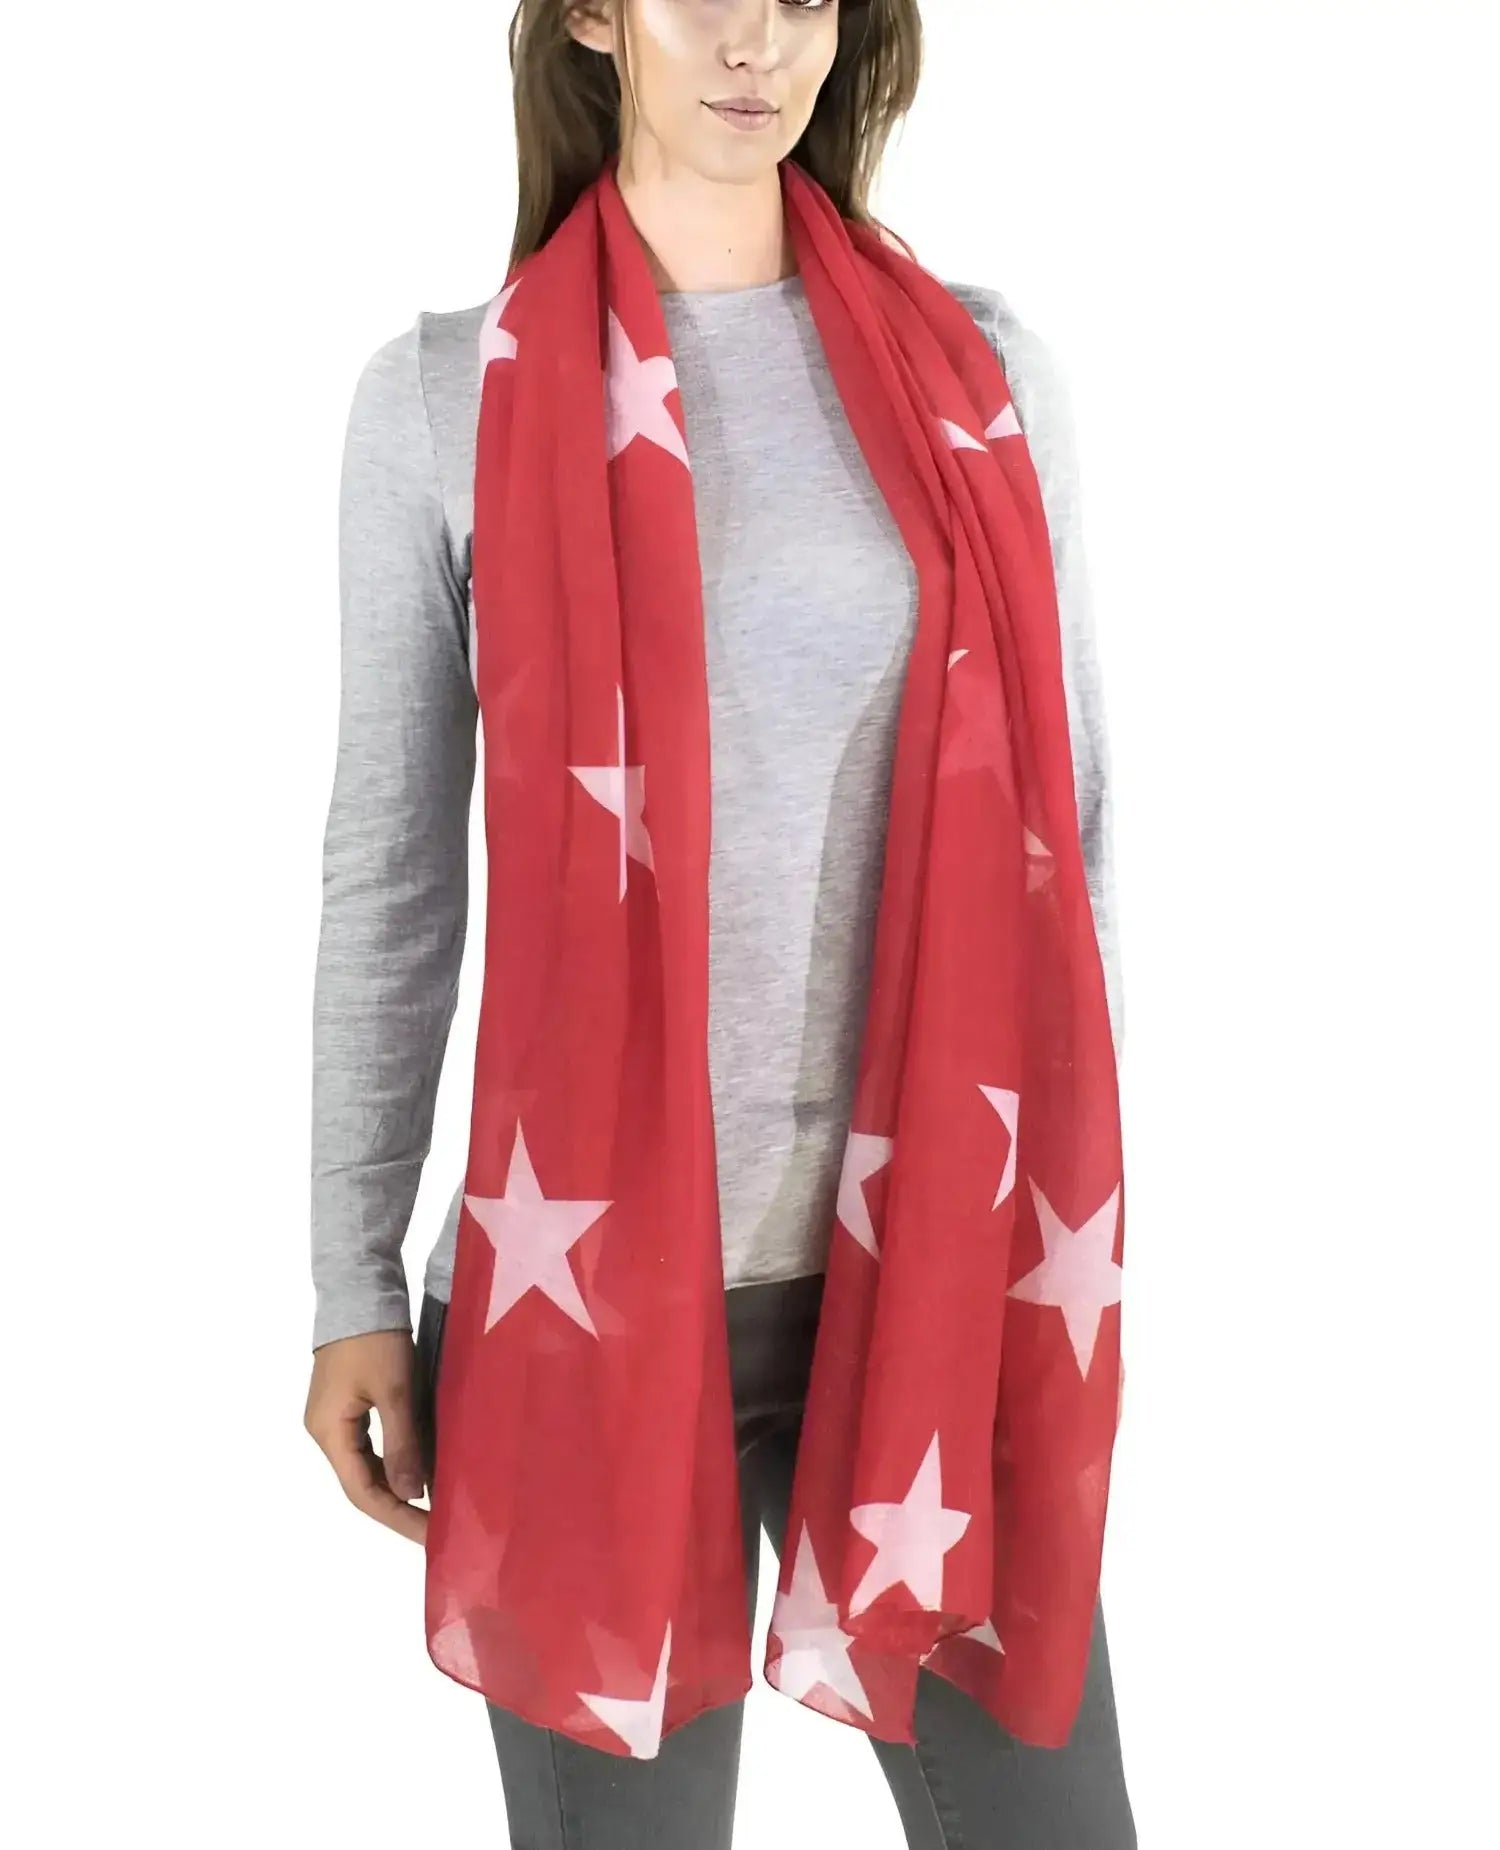 Woman wearing retro star oversized scarf with white stars.